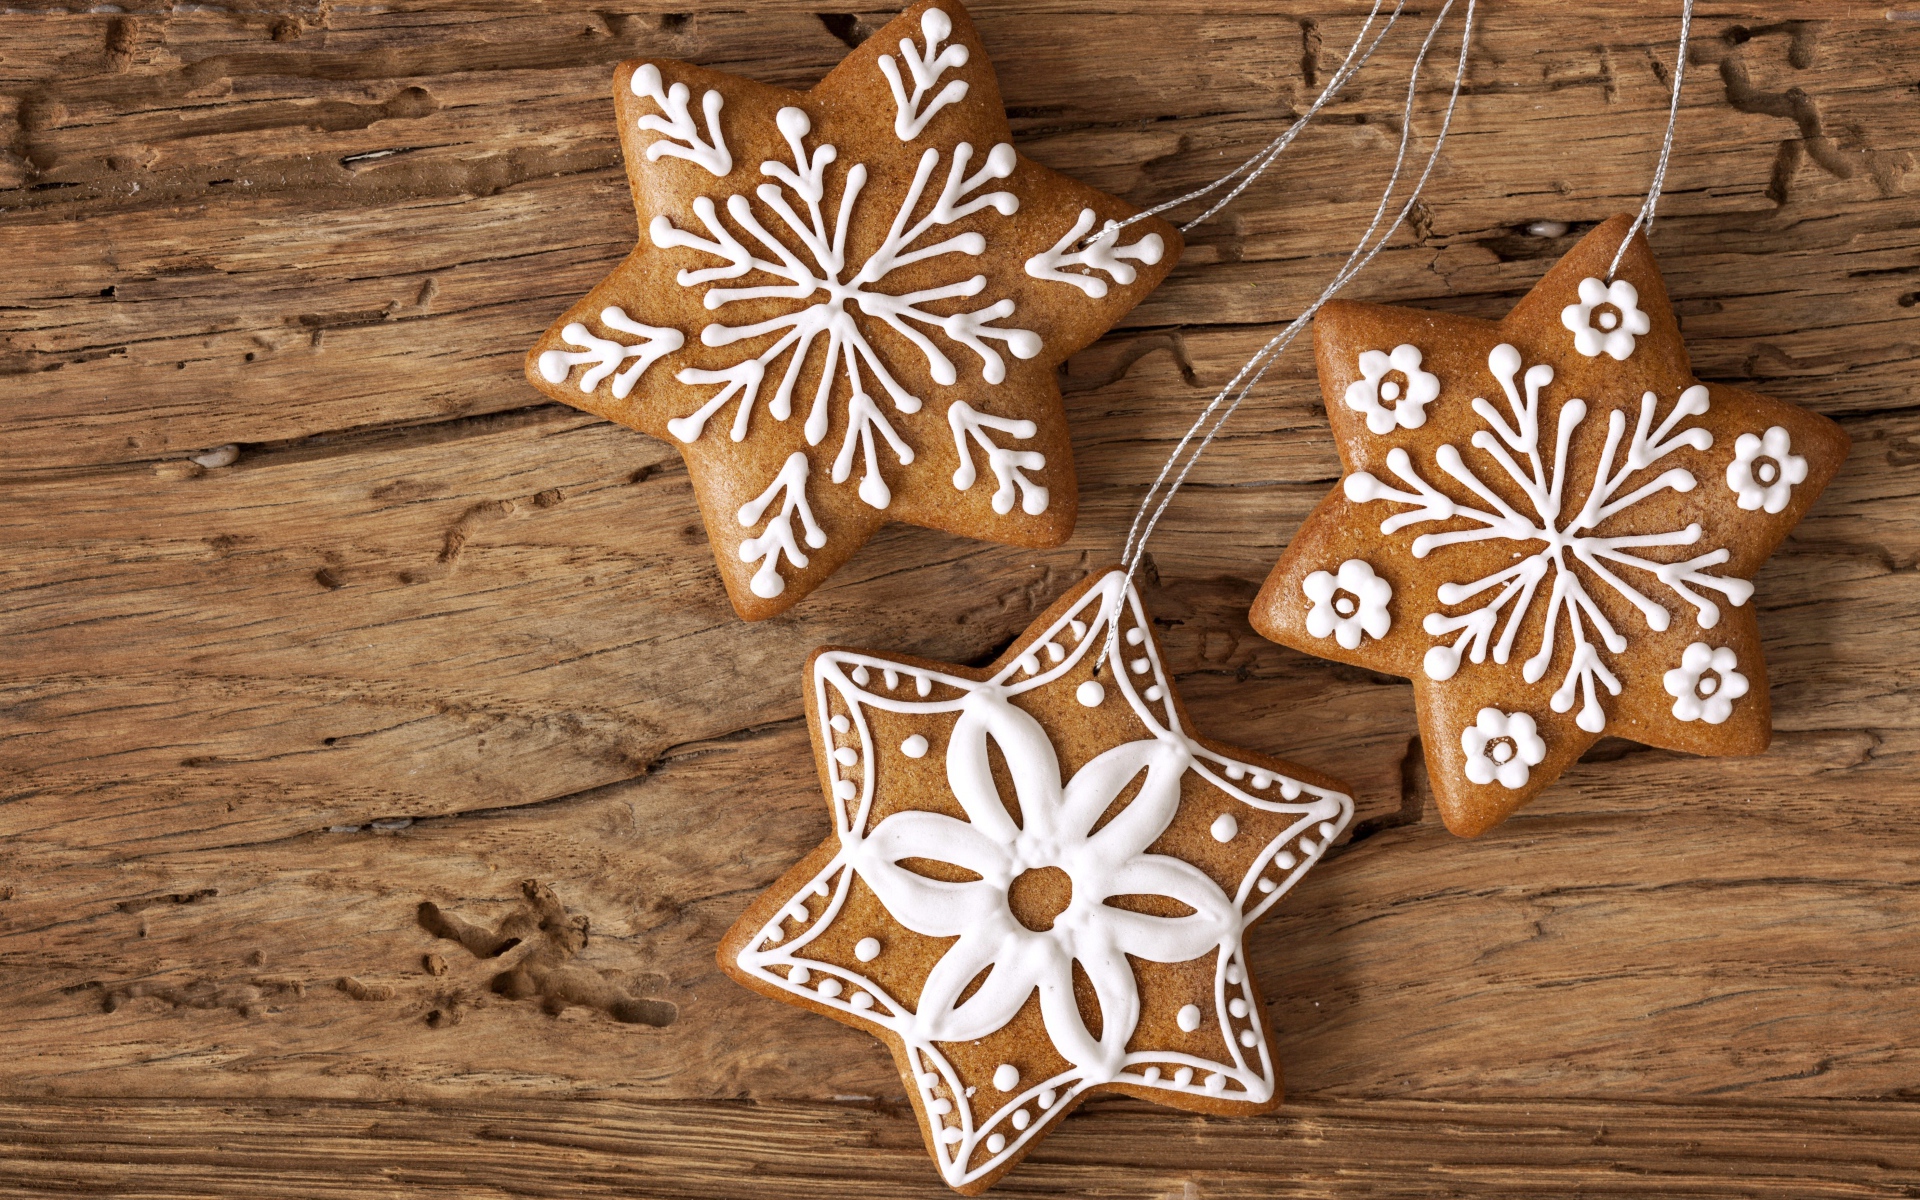 Cookies snowflakes on New Year's Eve 2015